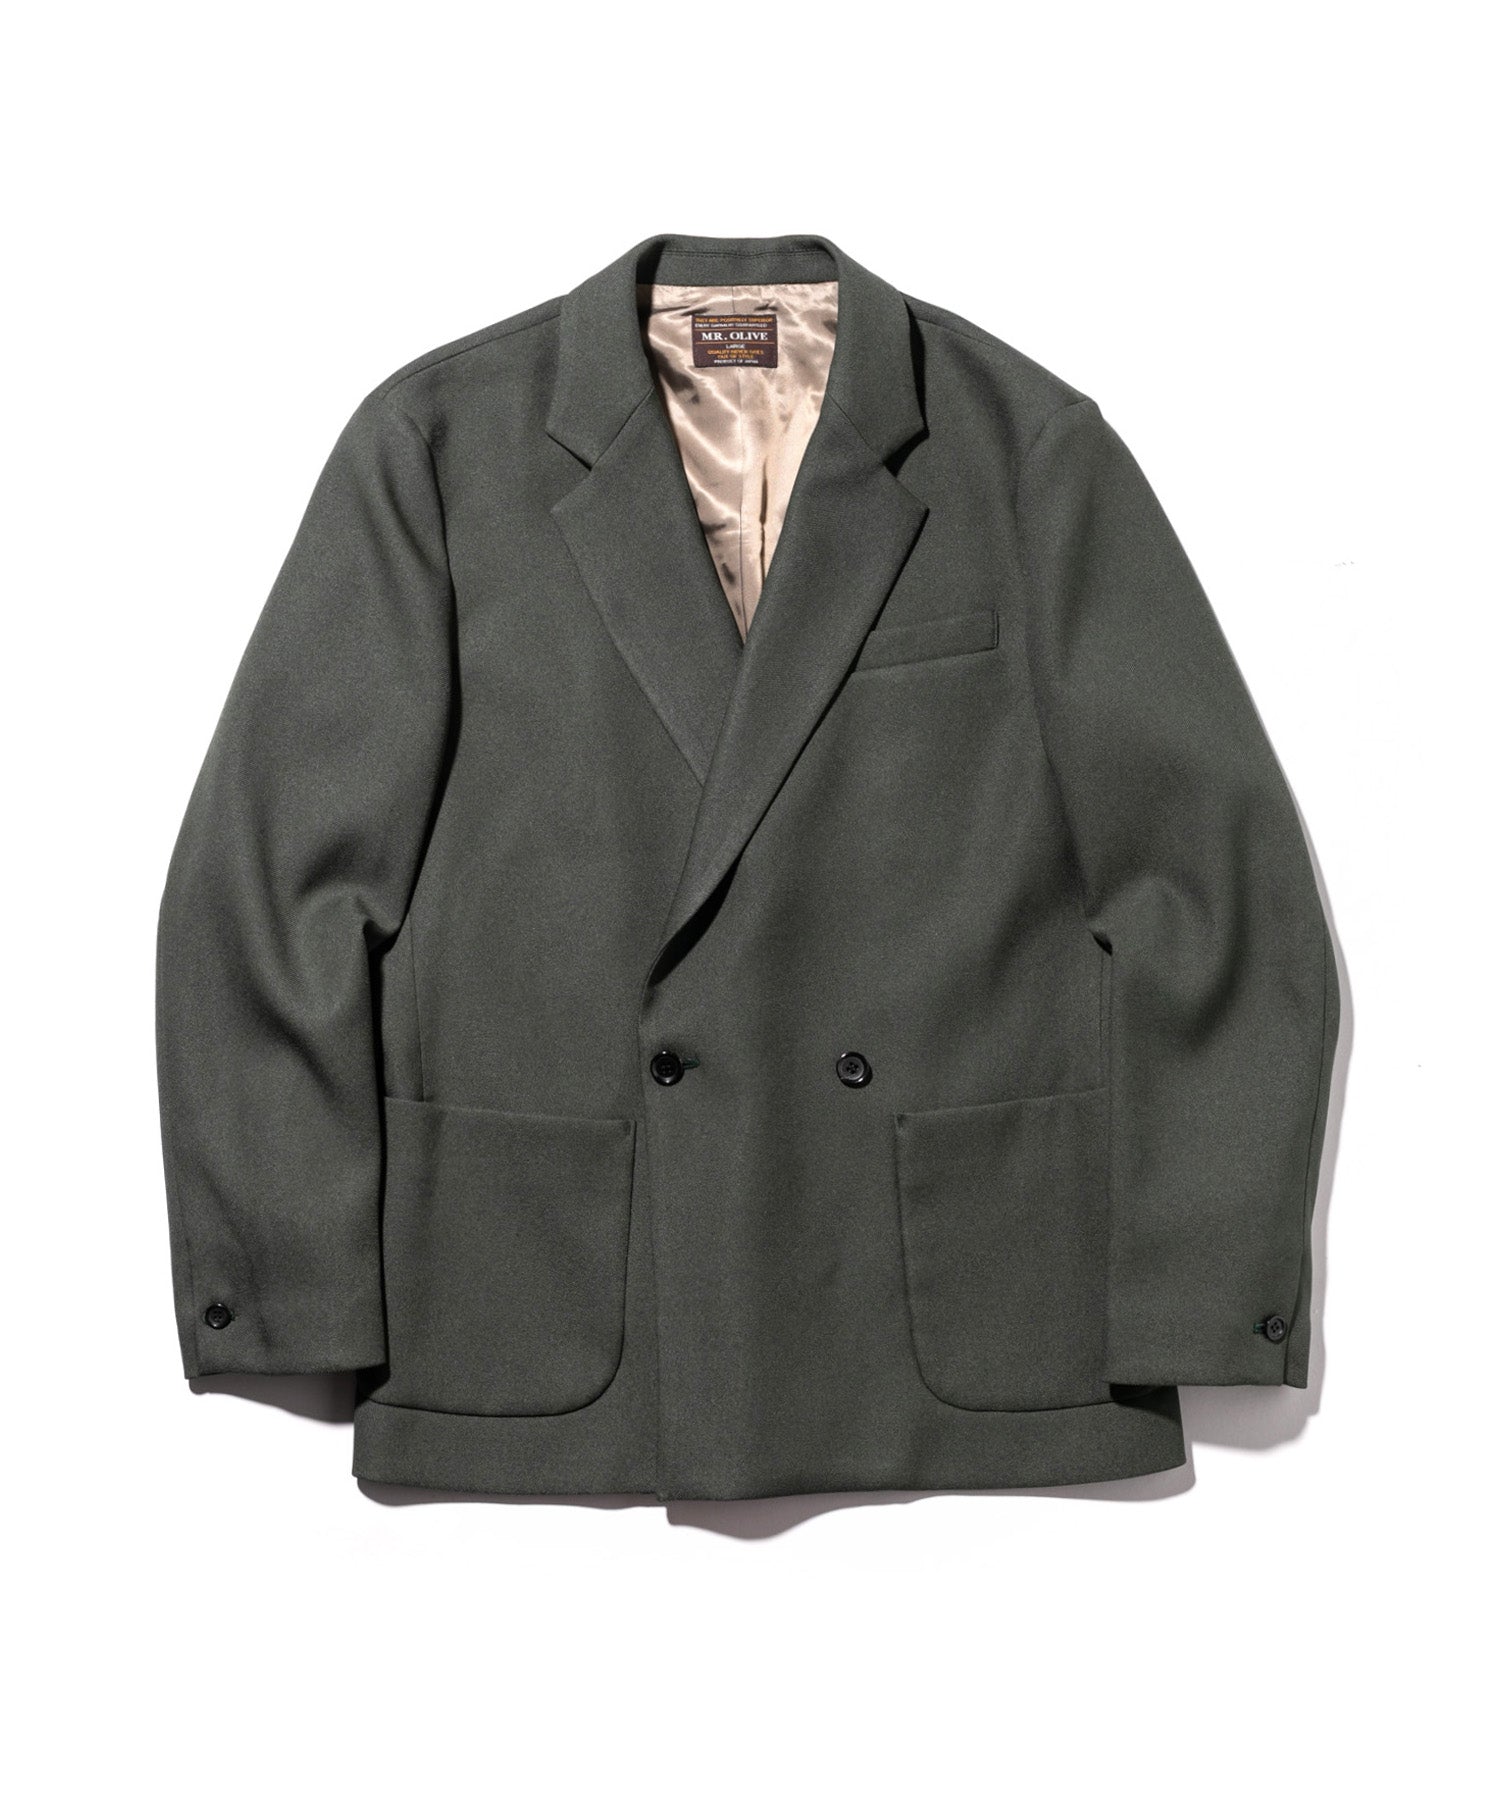 MR.OLIVE / RETRO POLYESTER TWILL / 2B DOUBLE BREASTED JACKET